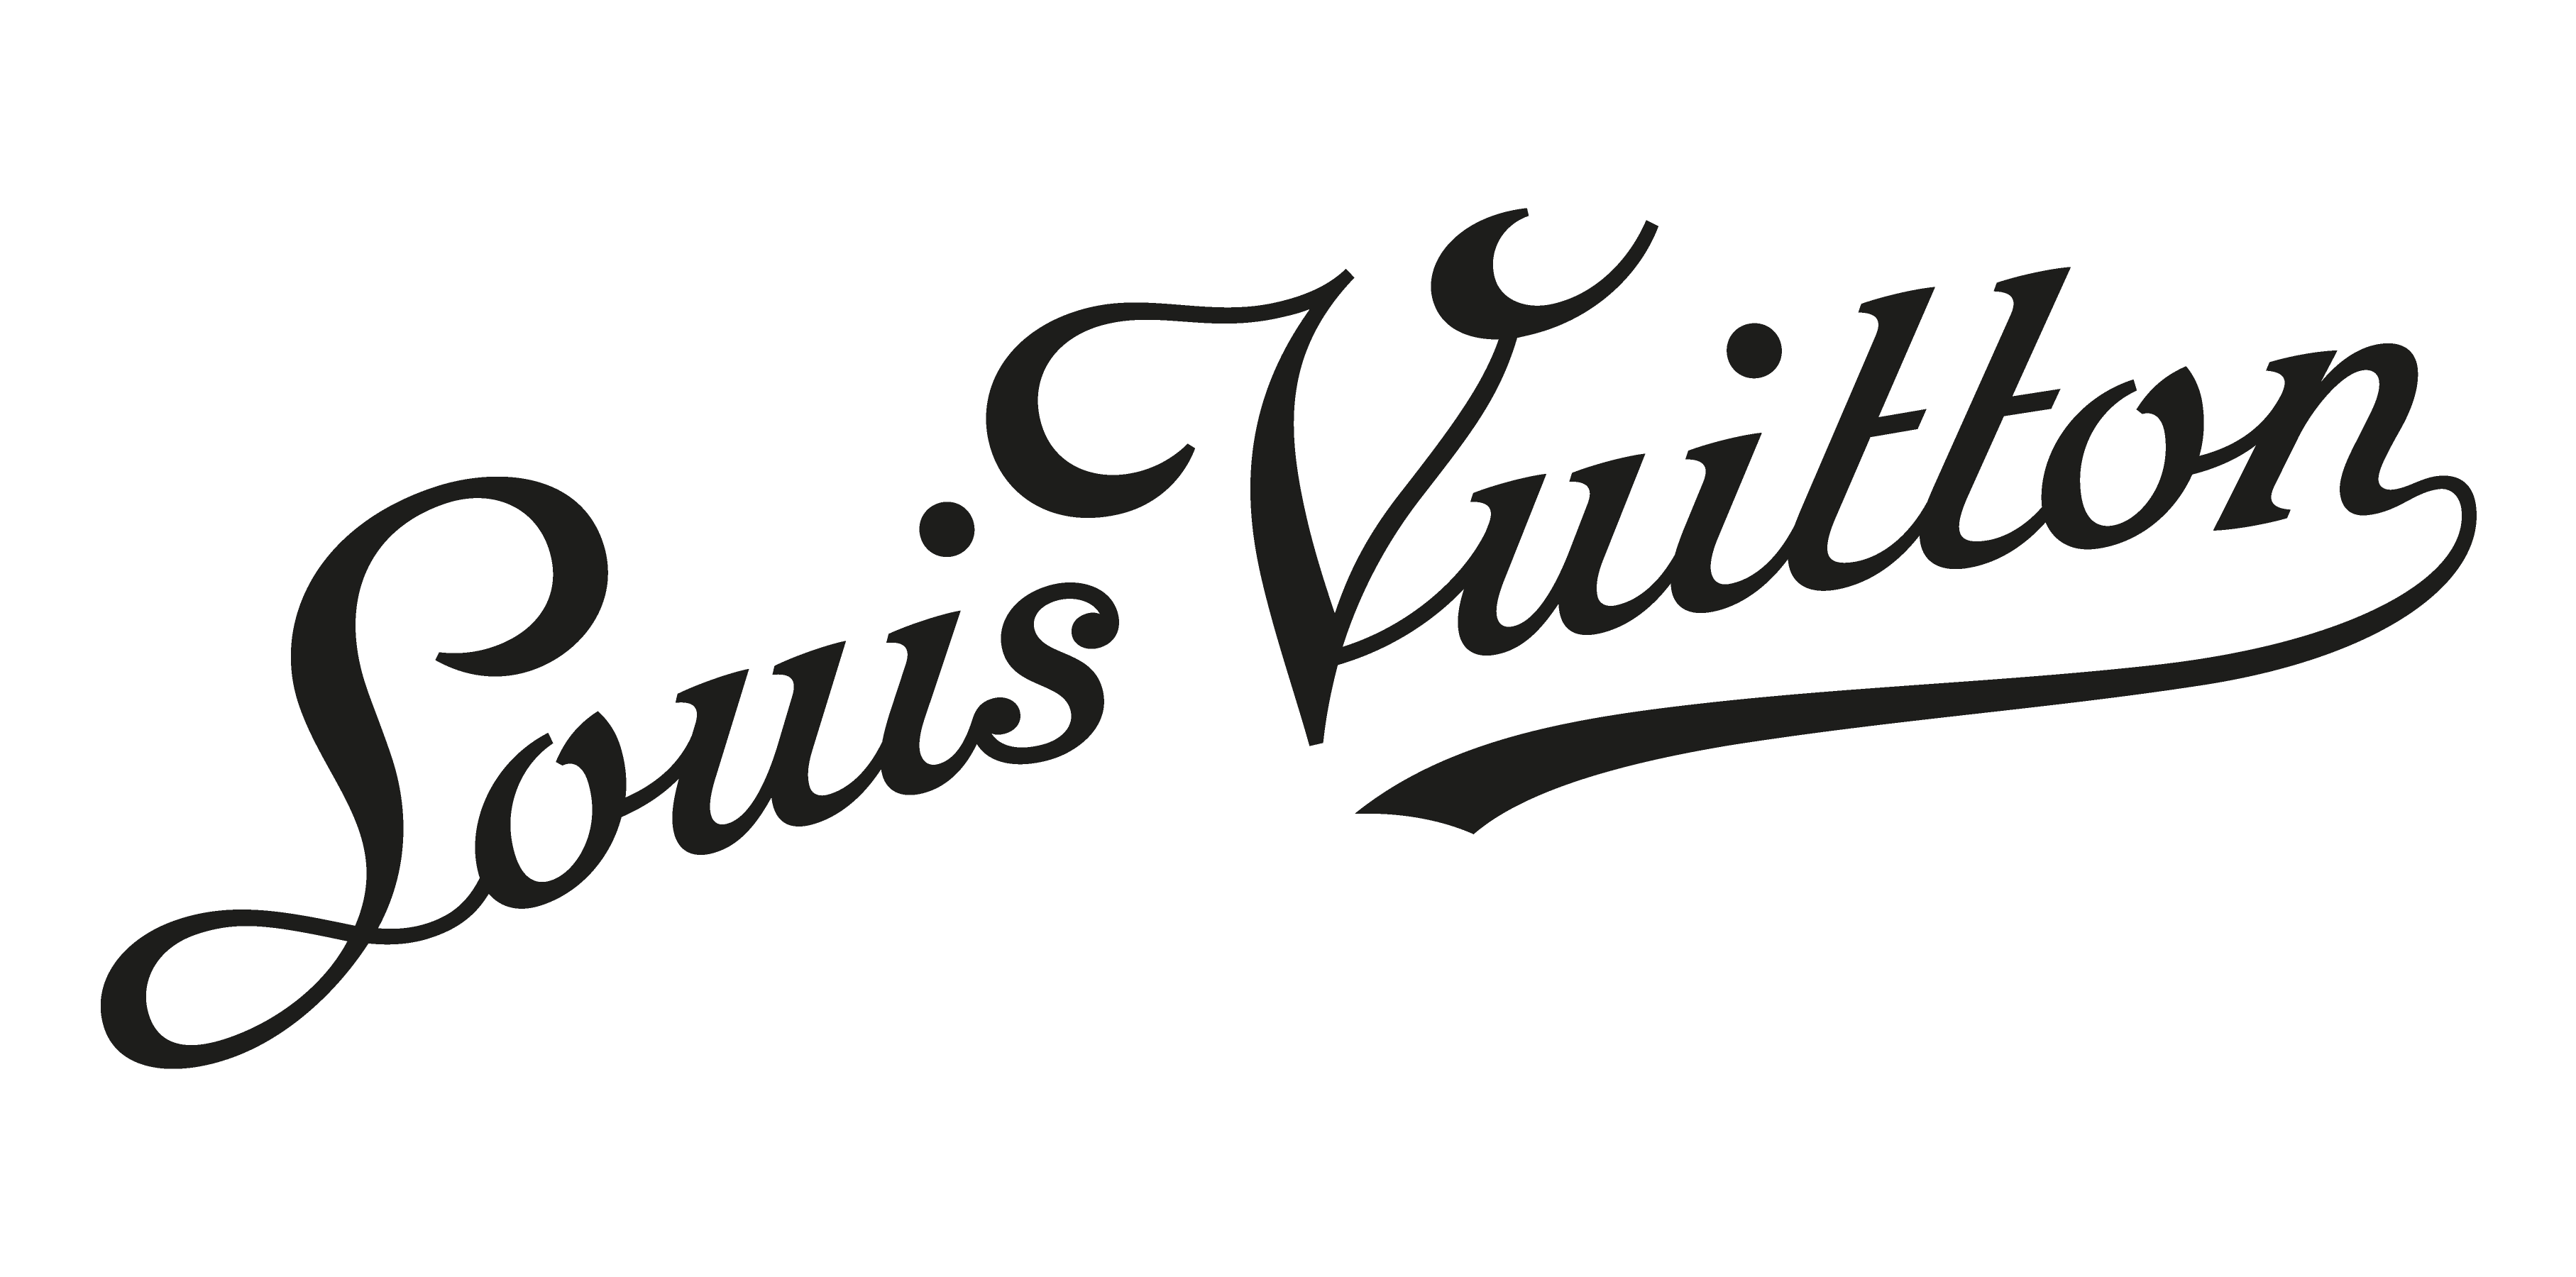 Louis Vuitton Logo and symbol, meaning, history, PNG, brand